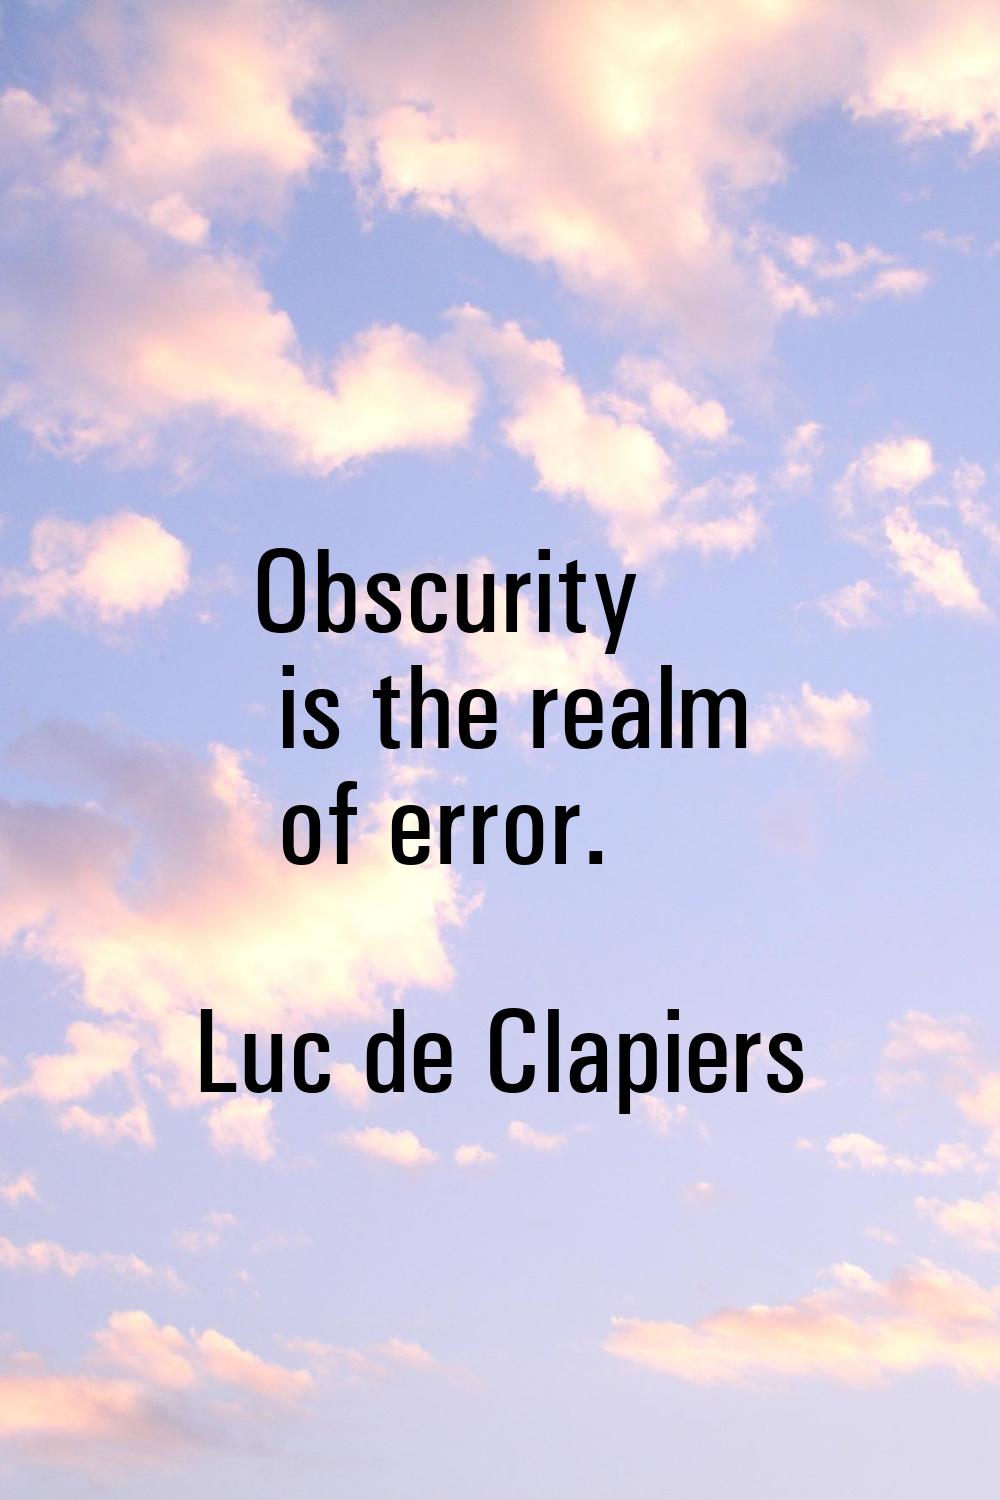 Obscurity is the realm of error.